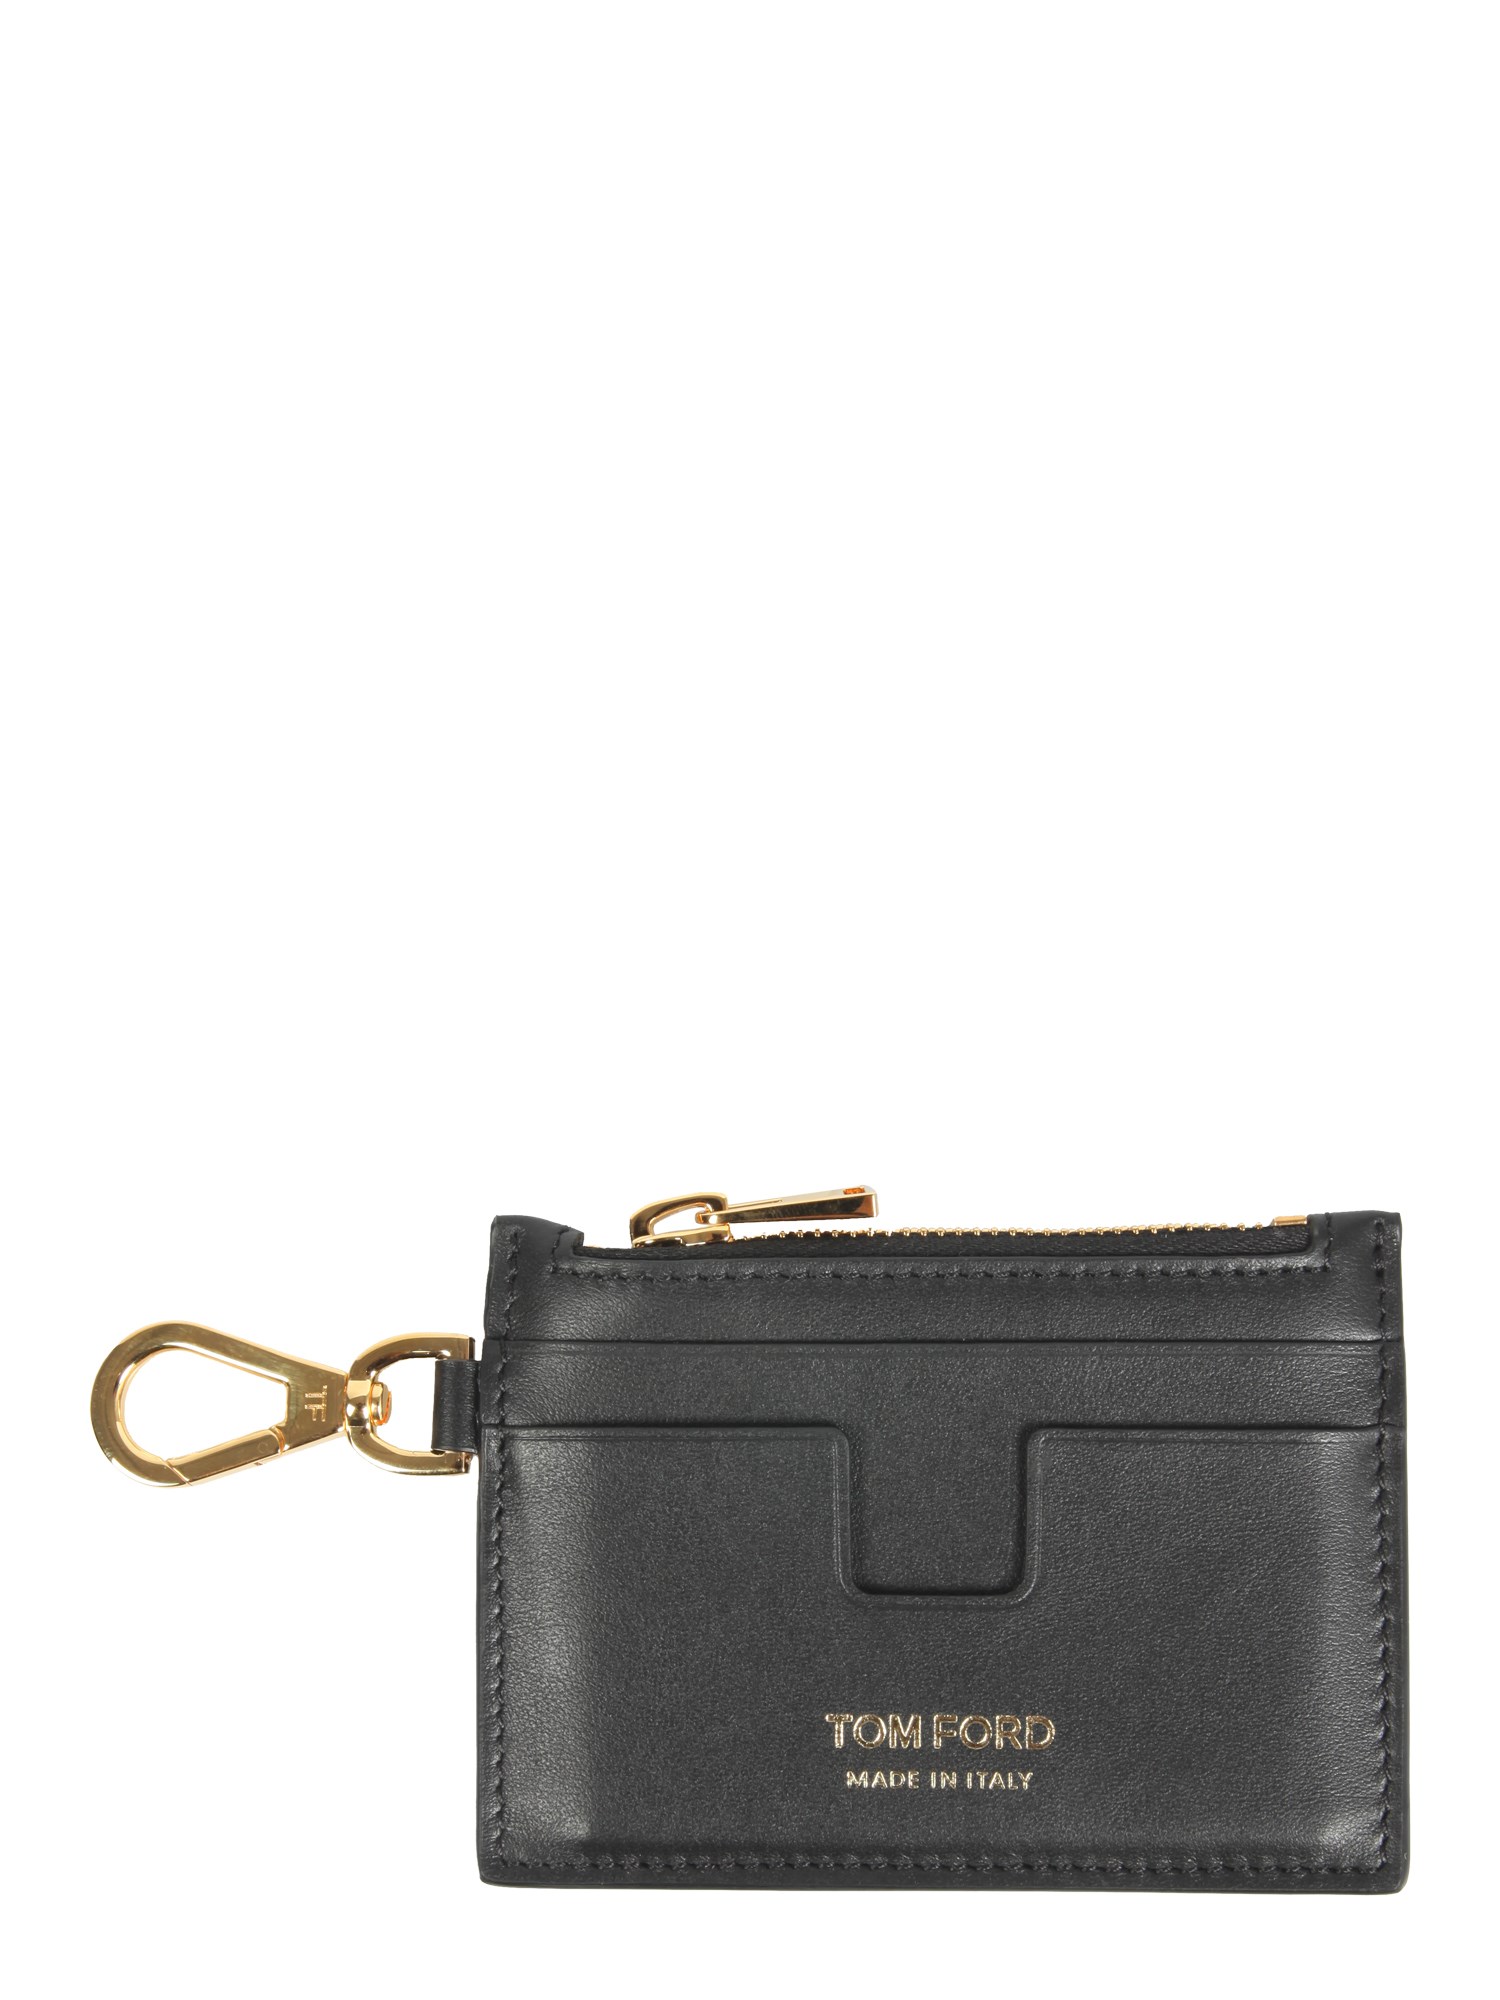 TOM FORD CARD HOLDER WITH ZIP,198517